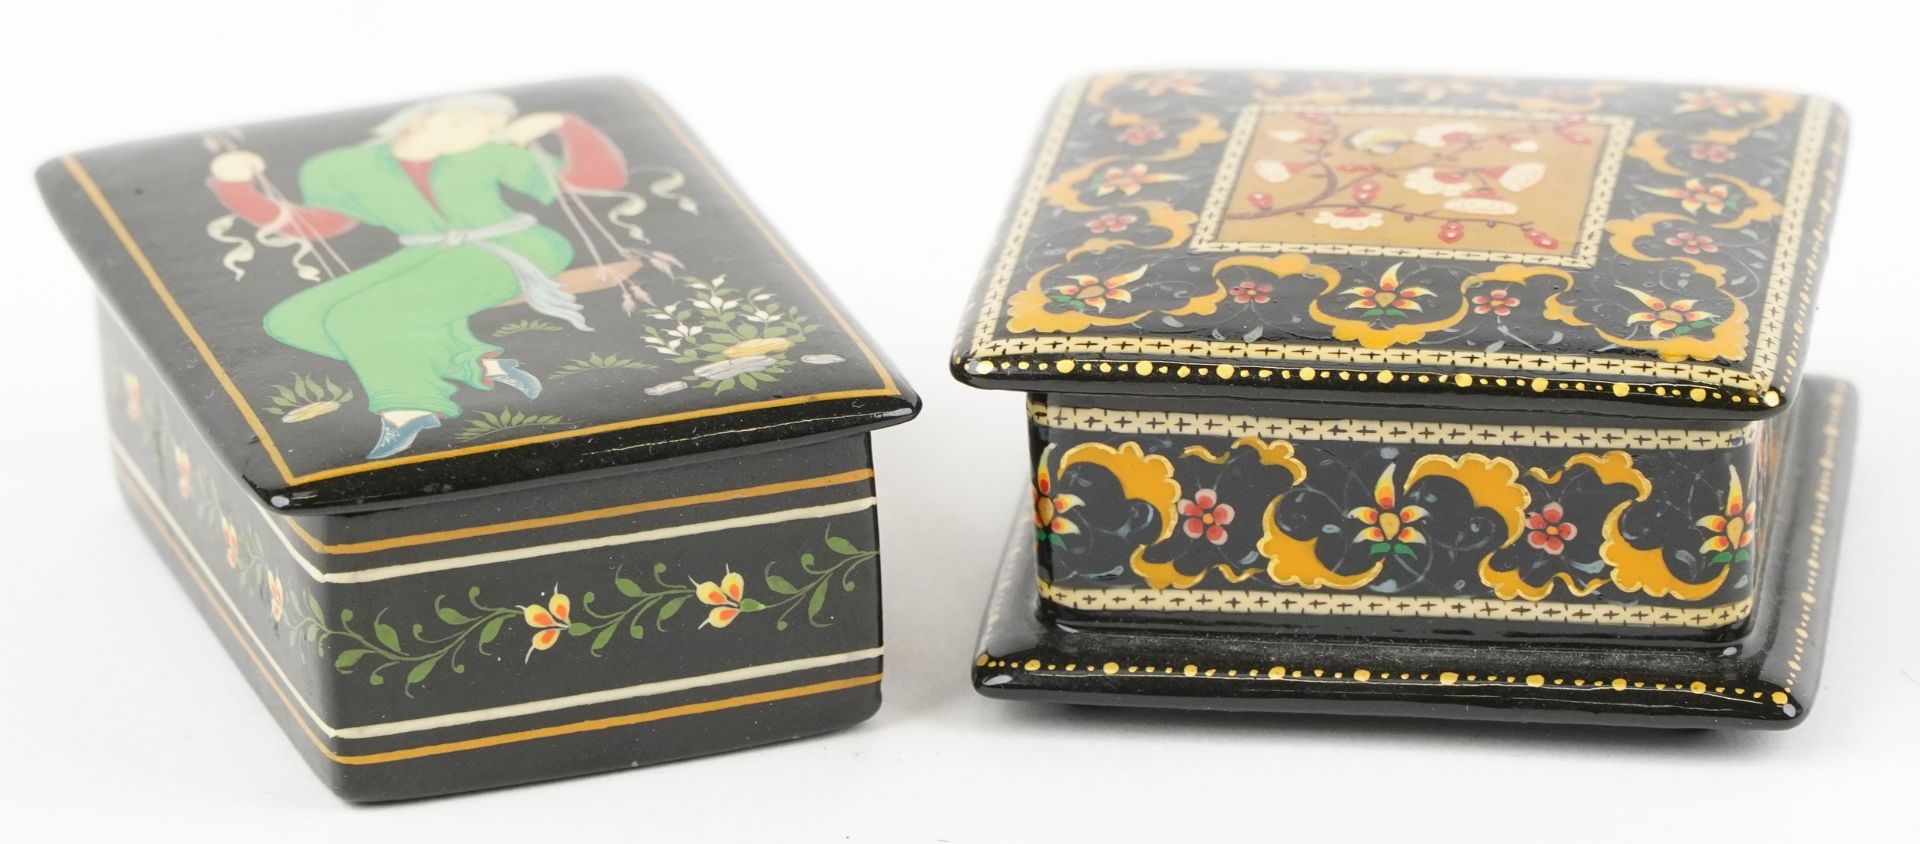 Two Islamic black lacquered boxes and covers including an example hand painted with flowers, the